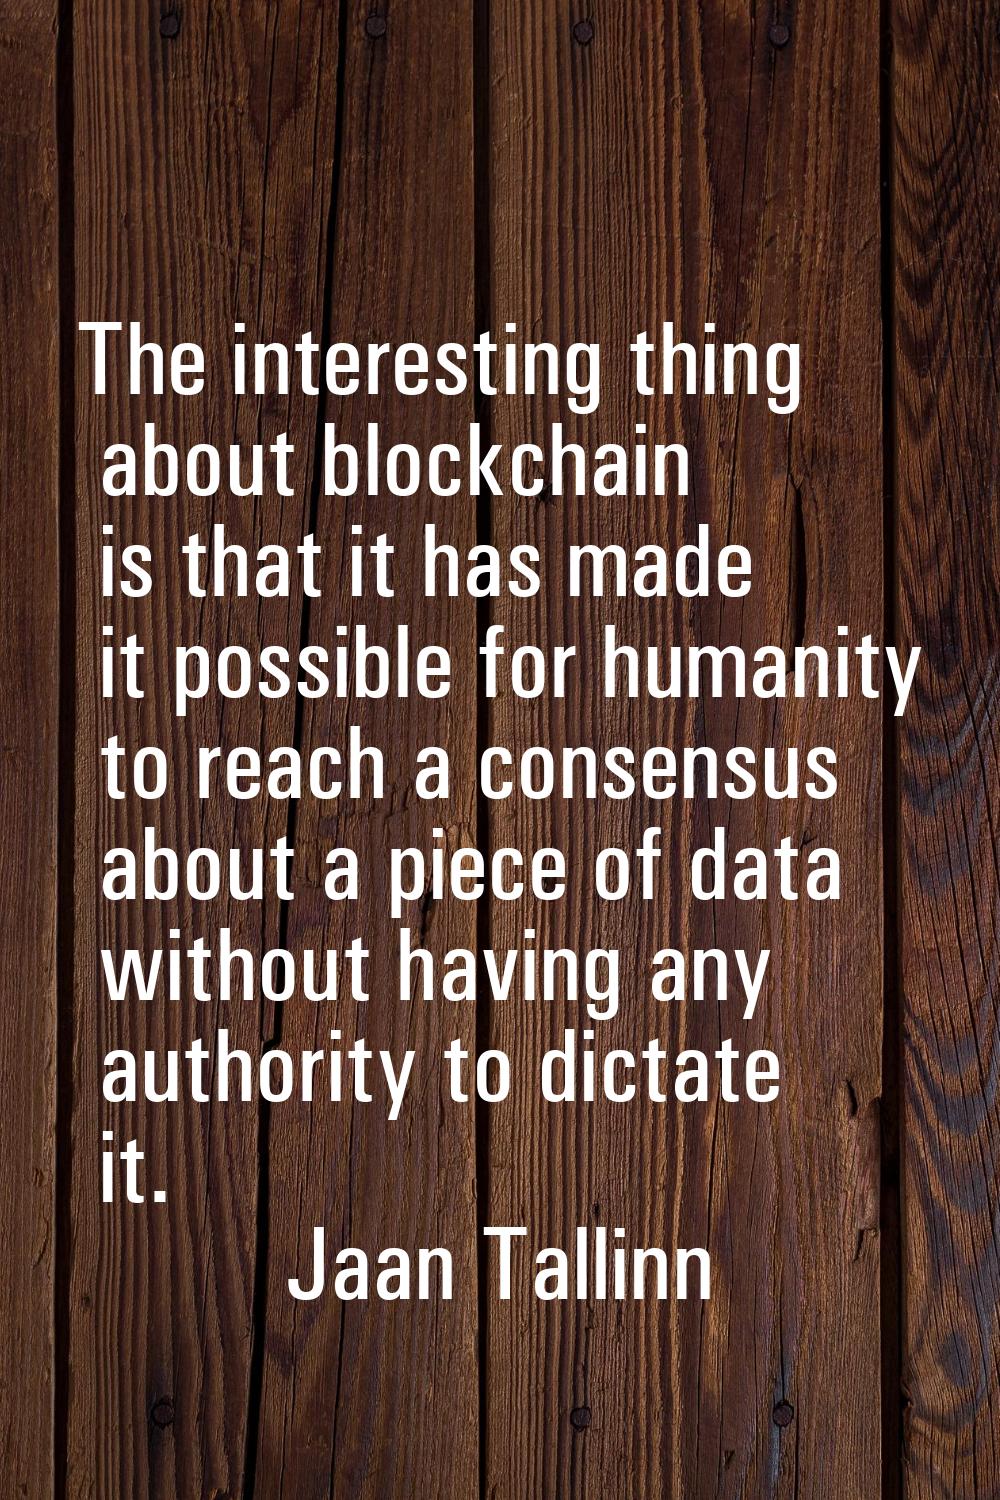 The interesting thing about blockchain is that it has made it possible for humanity to reach a cons